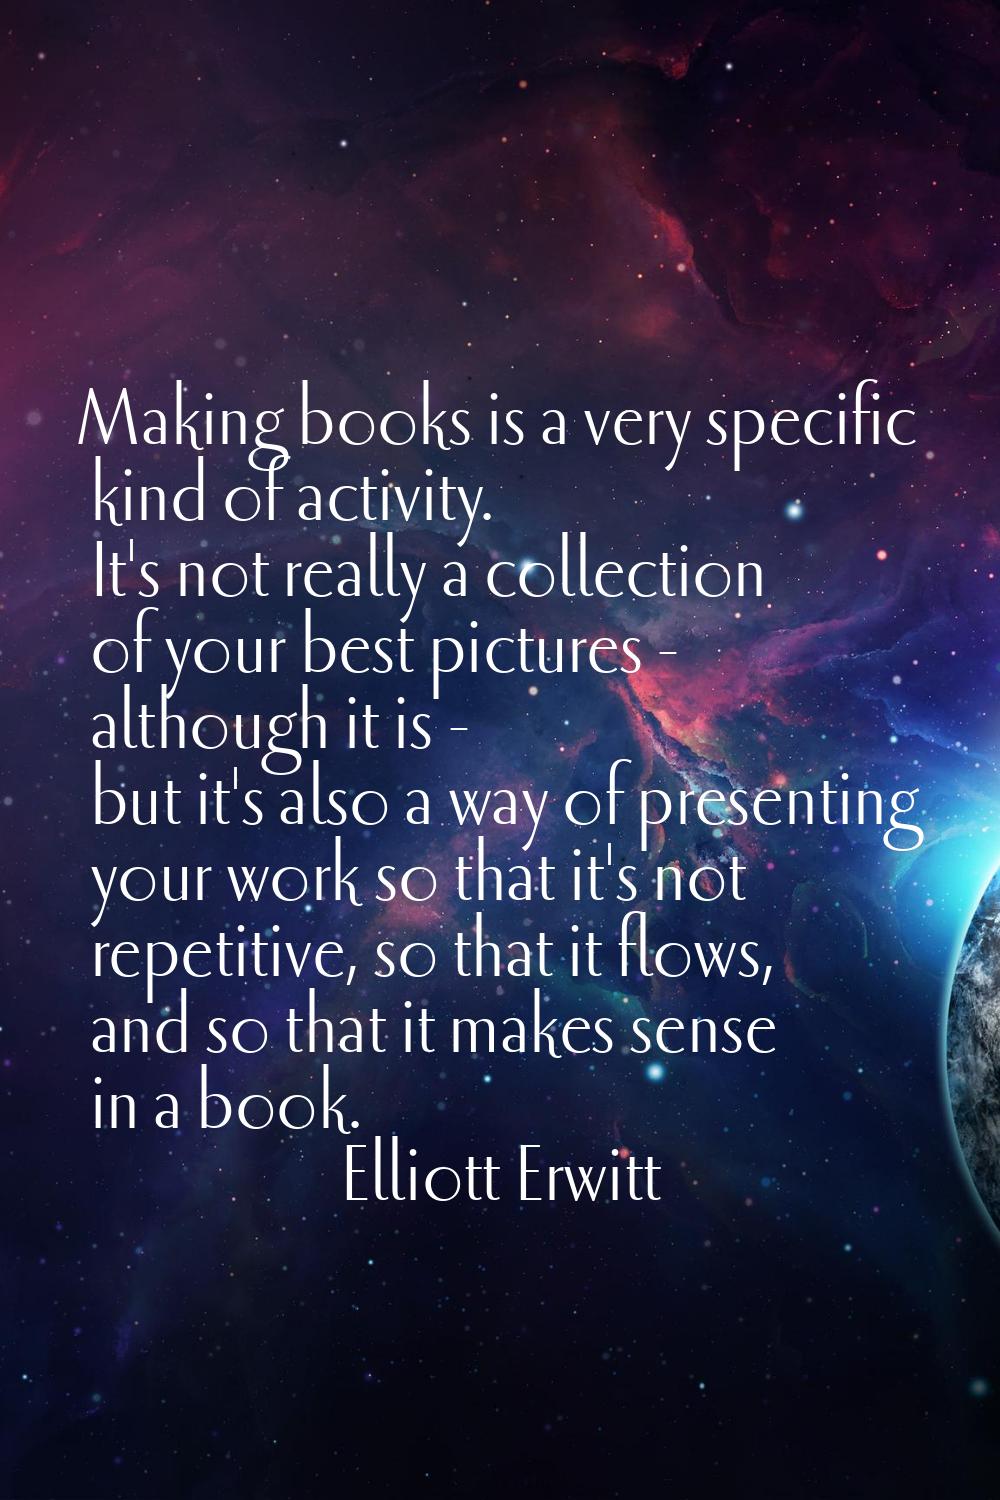 Making books is a very specific kind of activity. It's not really a collection of your best picture